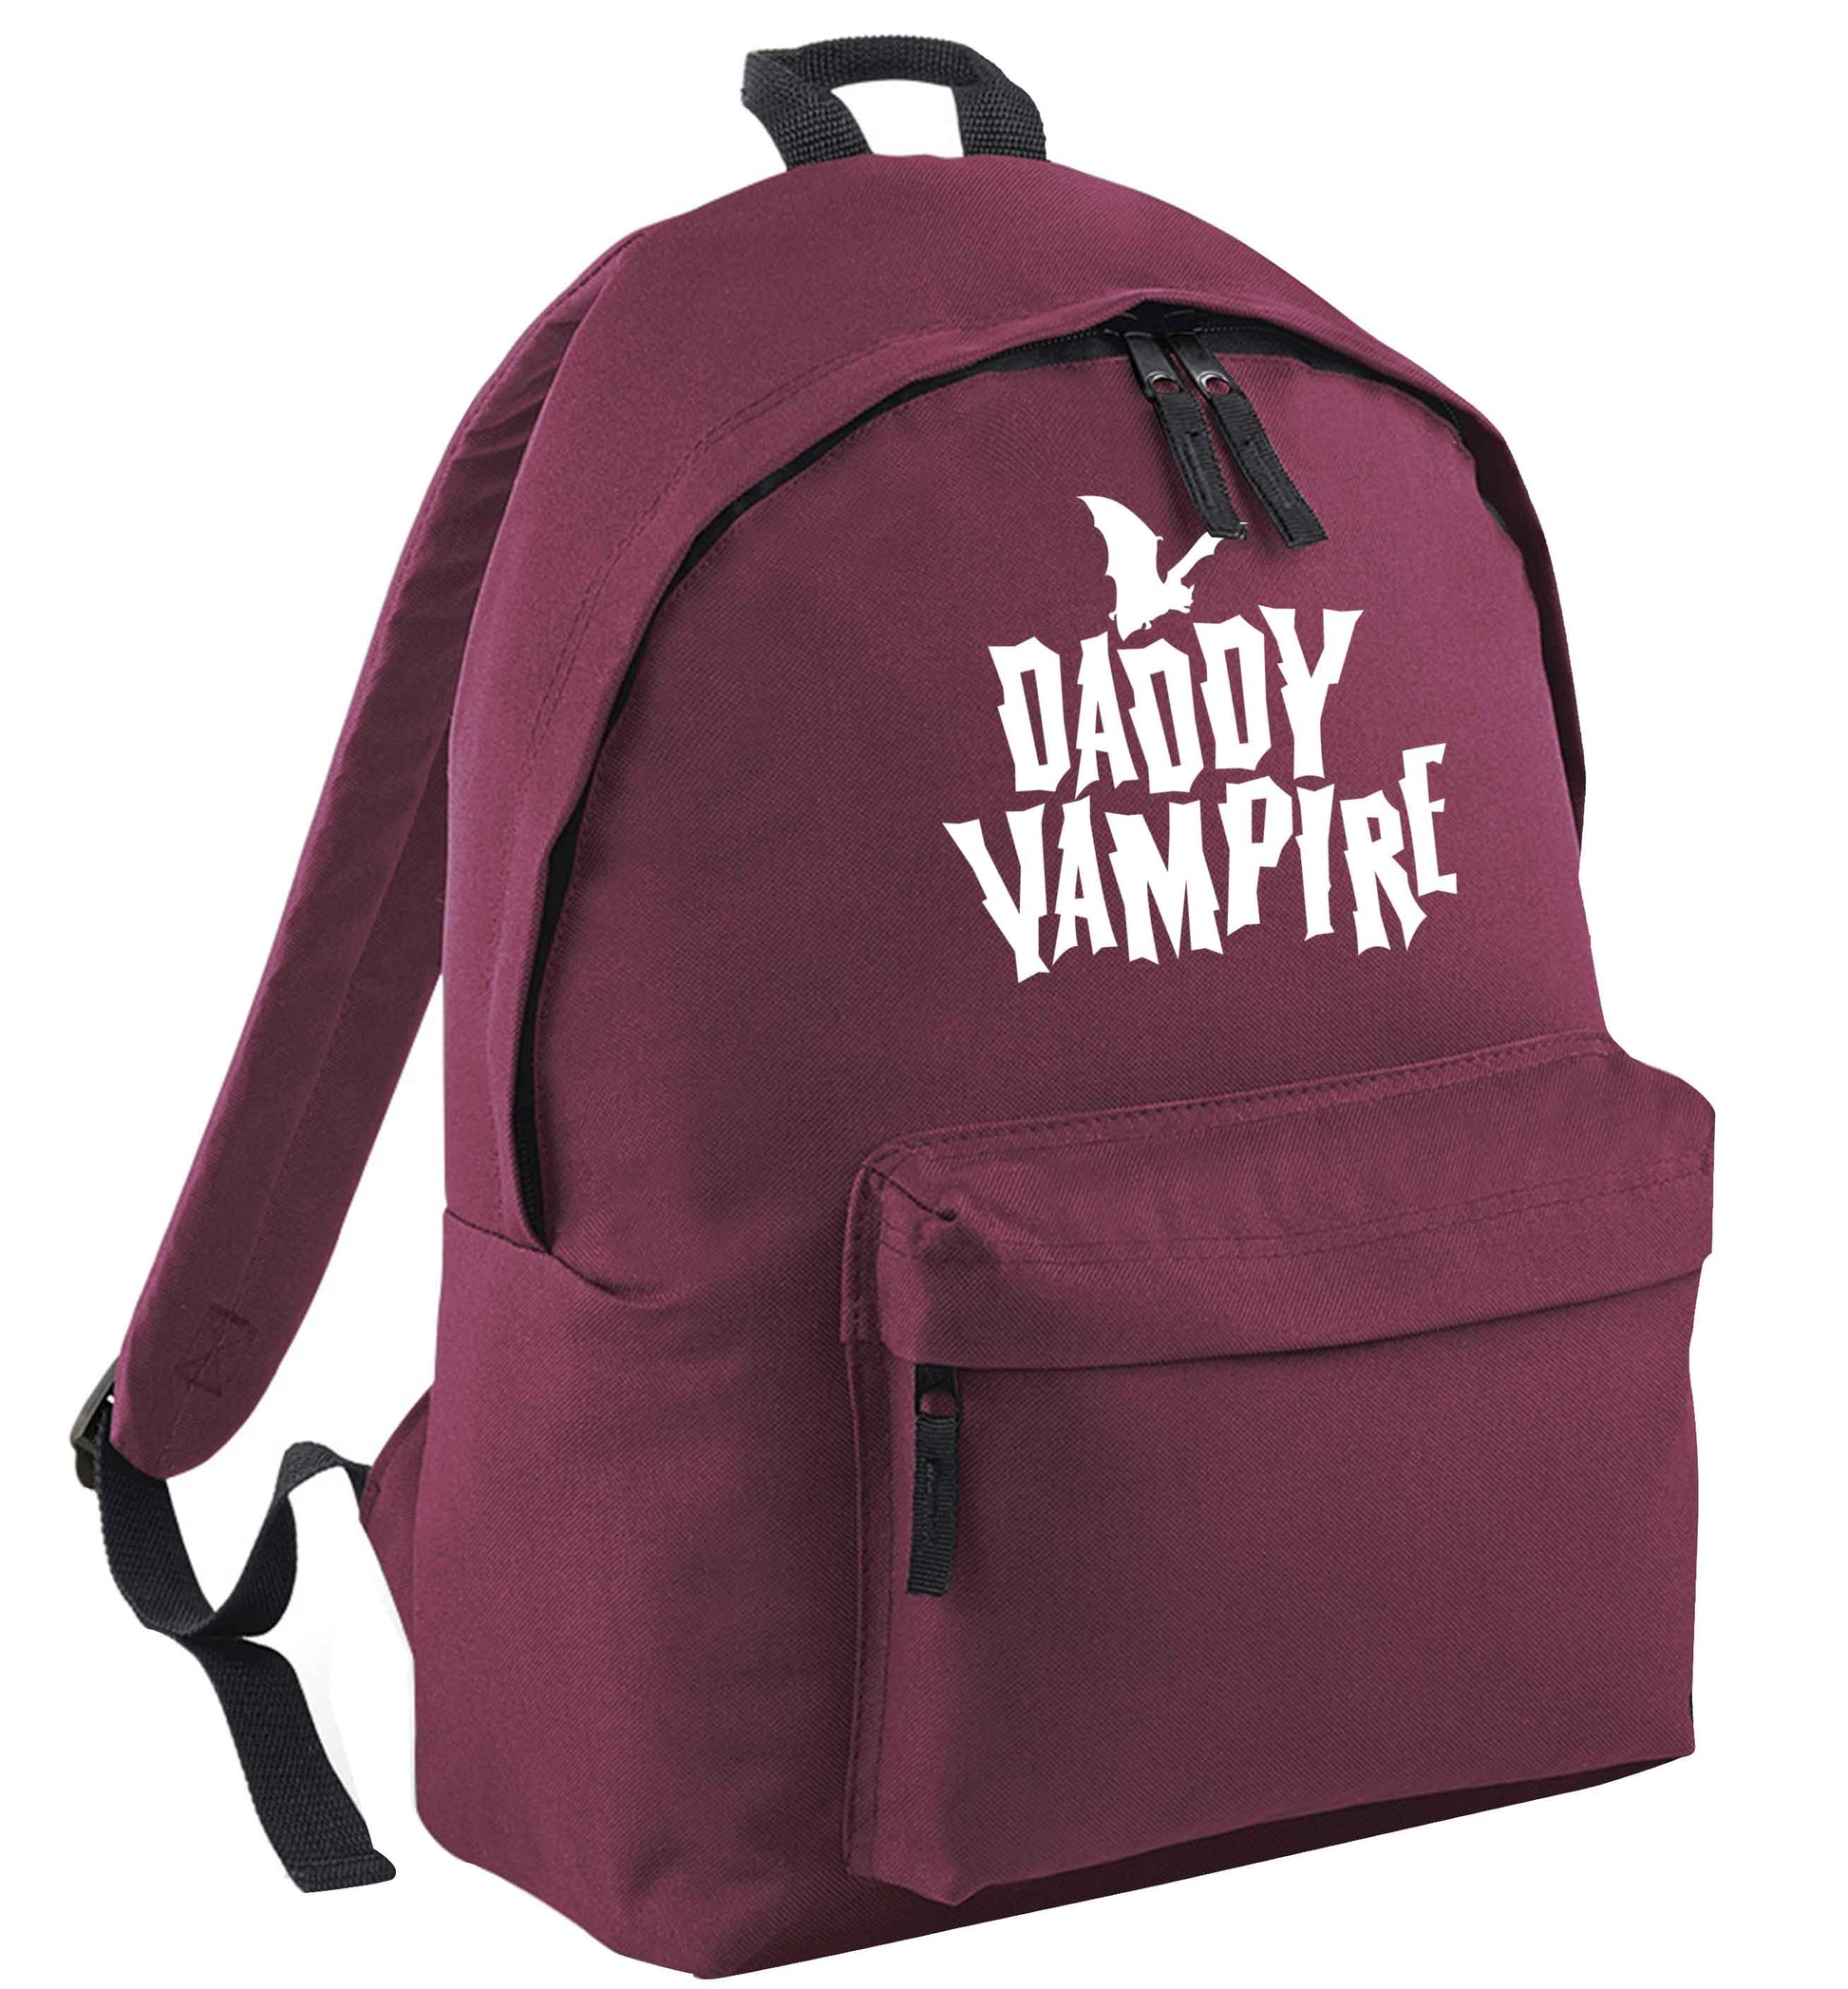 Daddy vampire maroon adults backpack